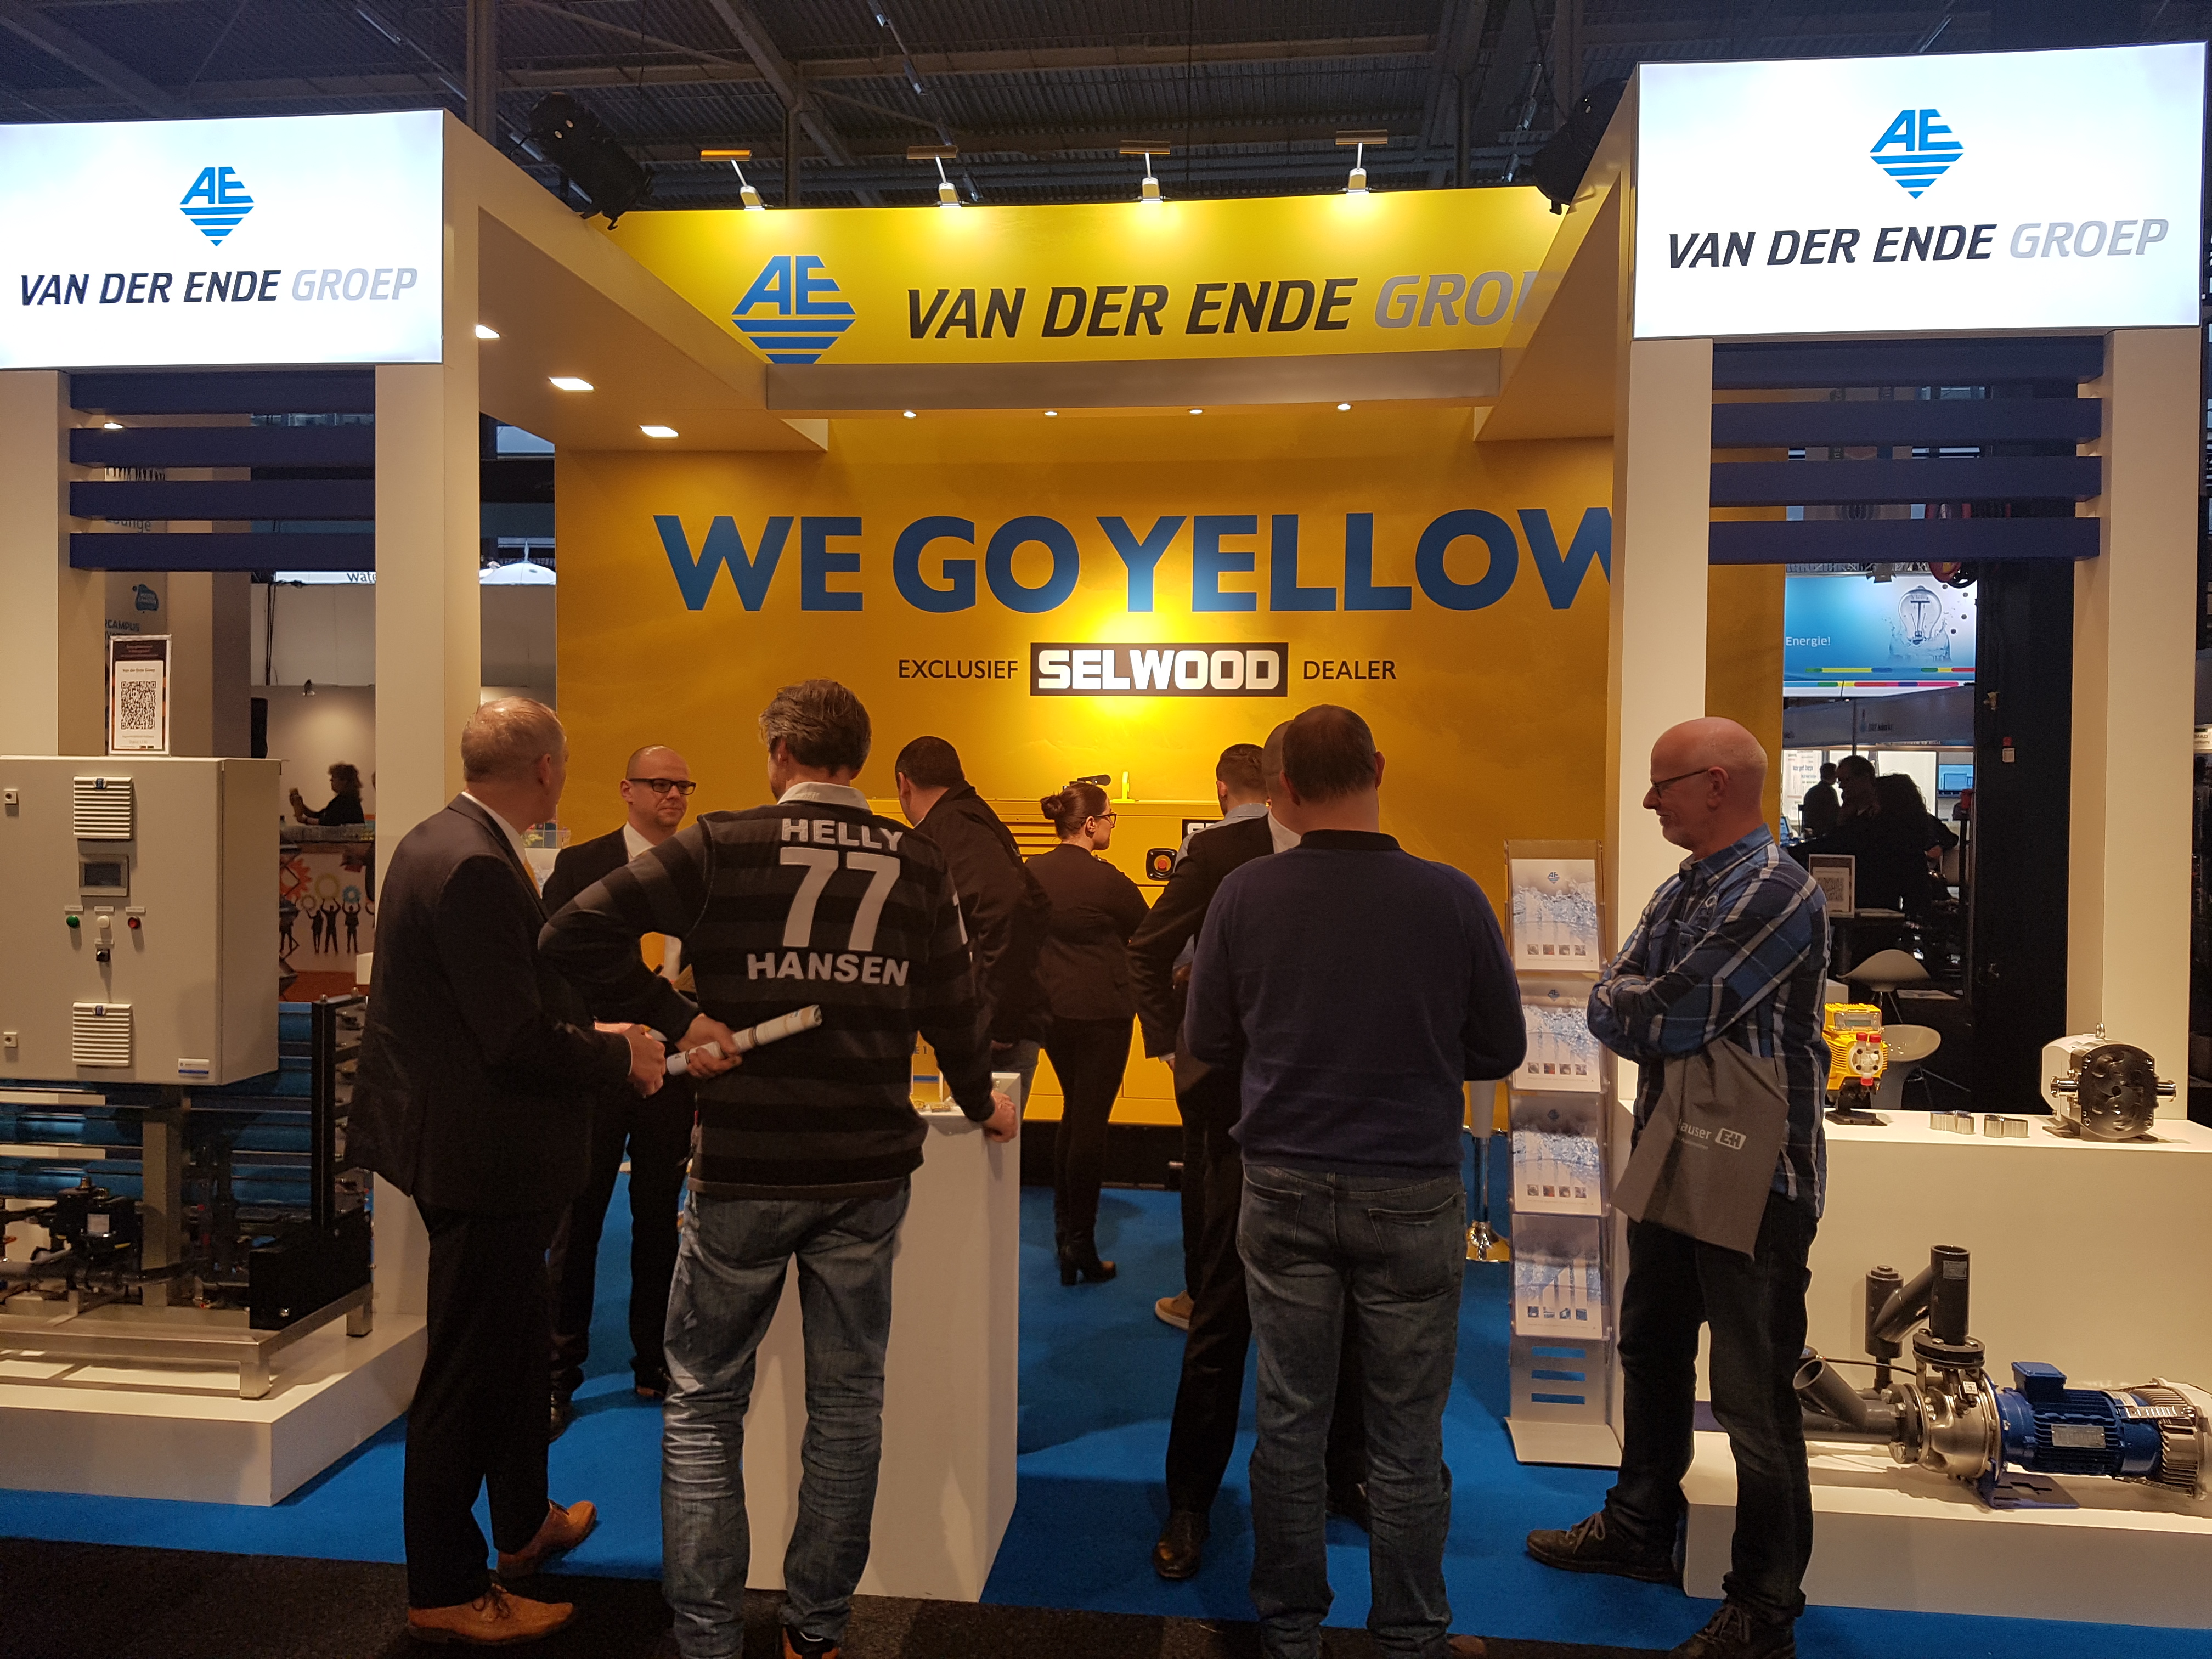 Selwood has appointed Van der Ende Group as a pump distributor in the Netherlands.